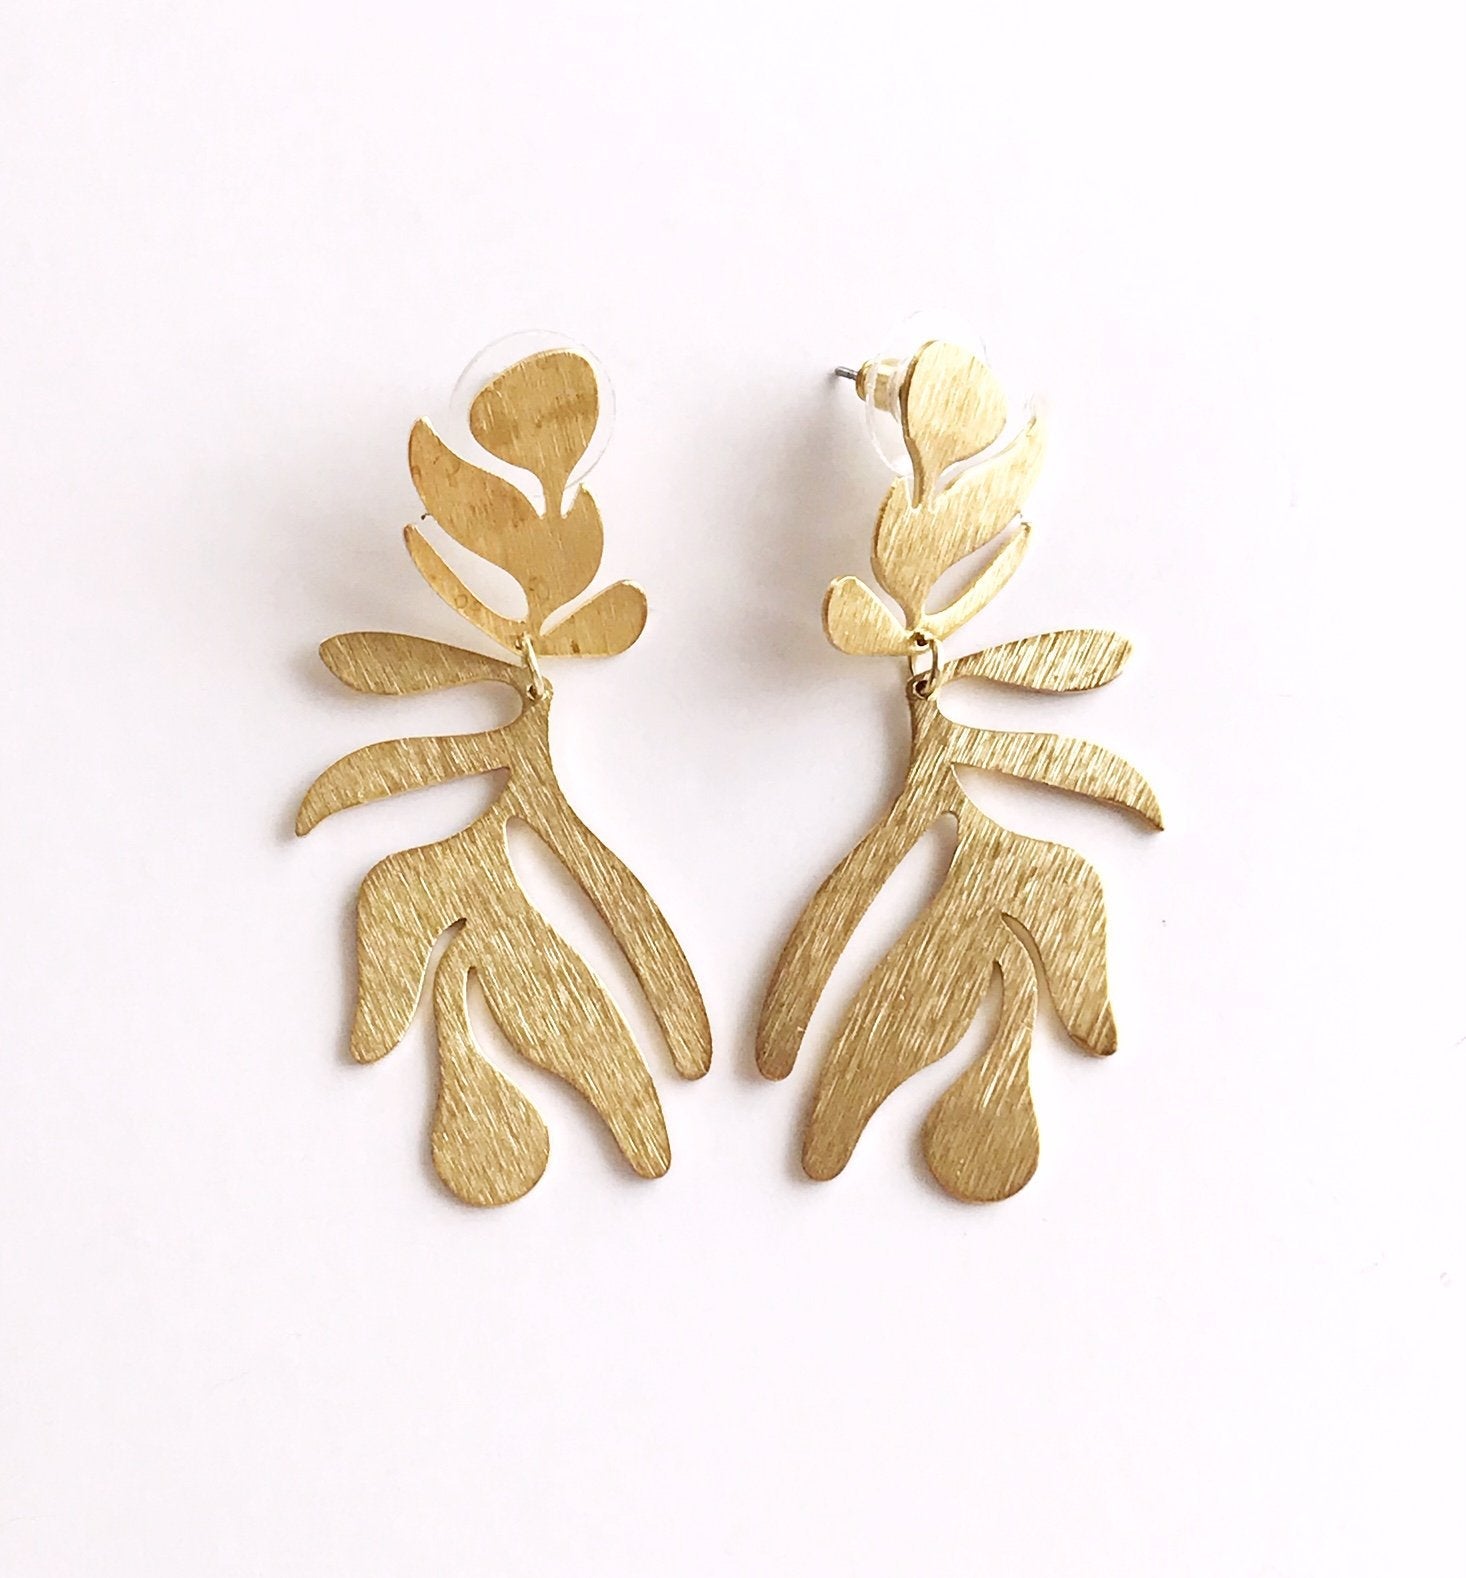 Floral Brass Statement Earrings - Handcrafted and Lightweight
Keywords: statement earrings, brass earrings, handcrafted jewelry, floral design, lightweight earrings, bohemian style, modern jewelry. Bijou Her